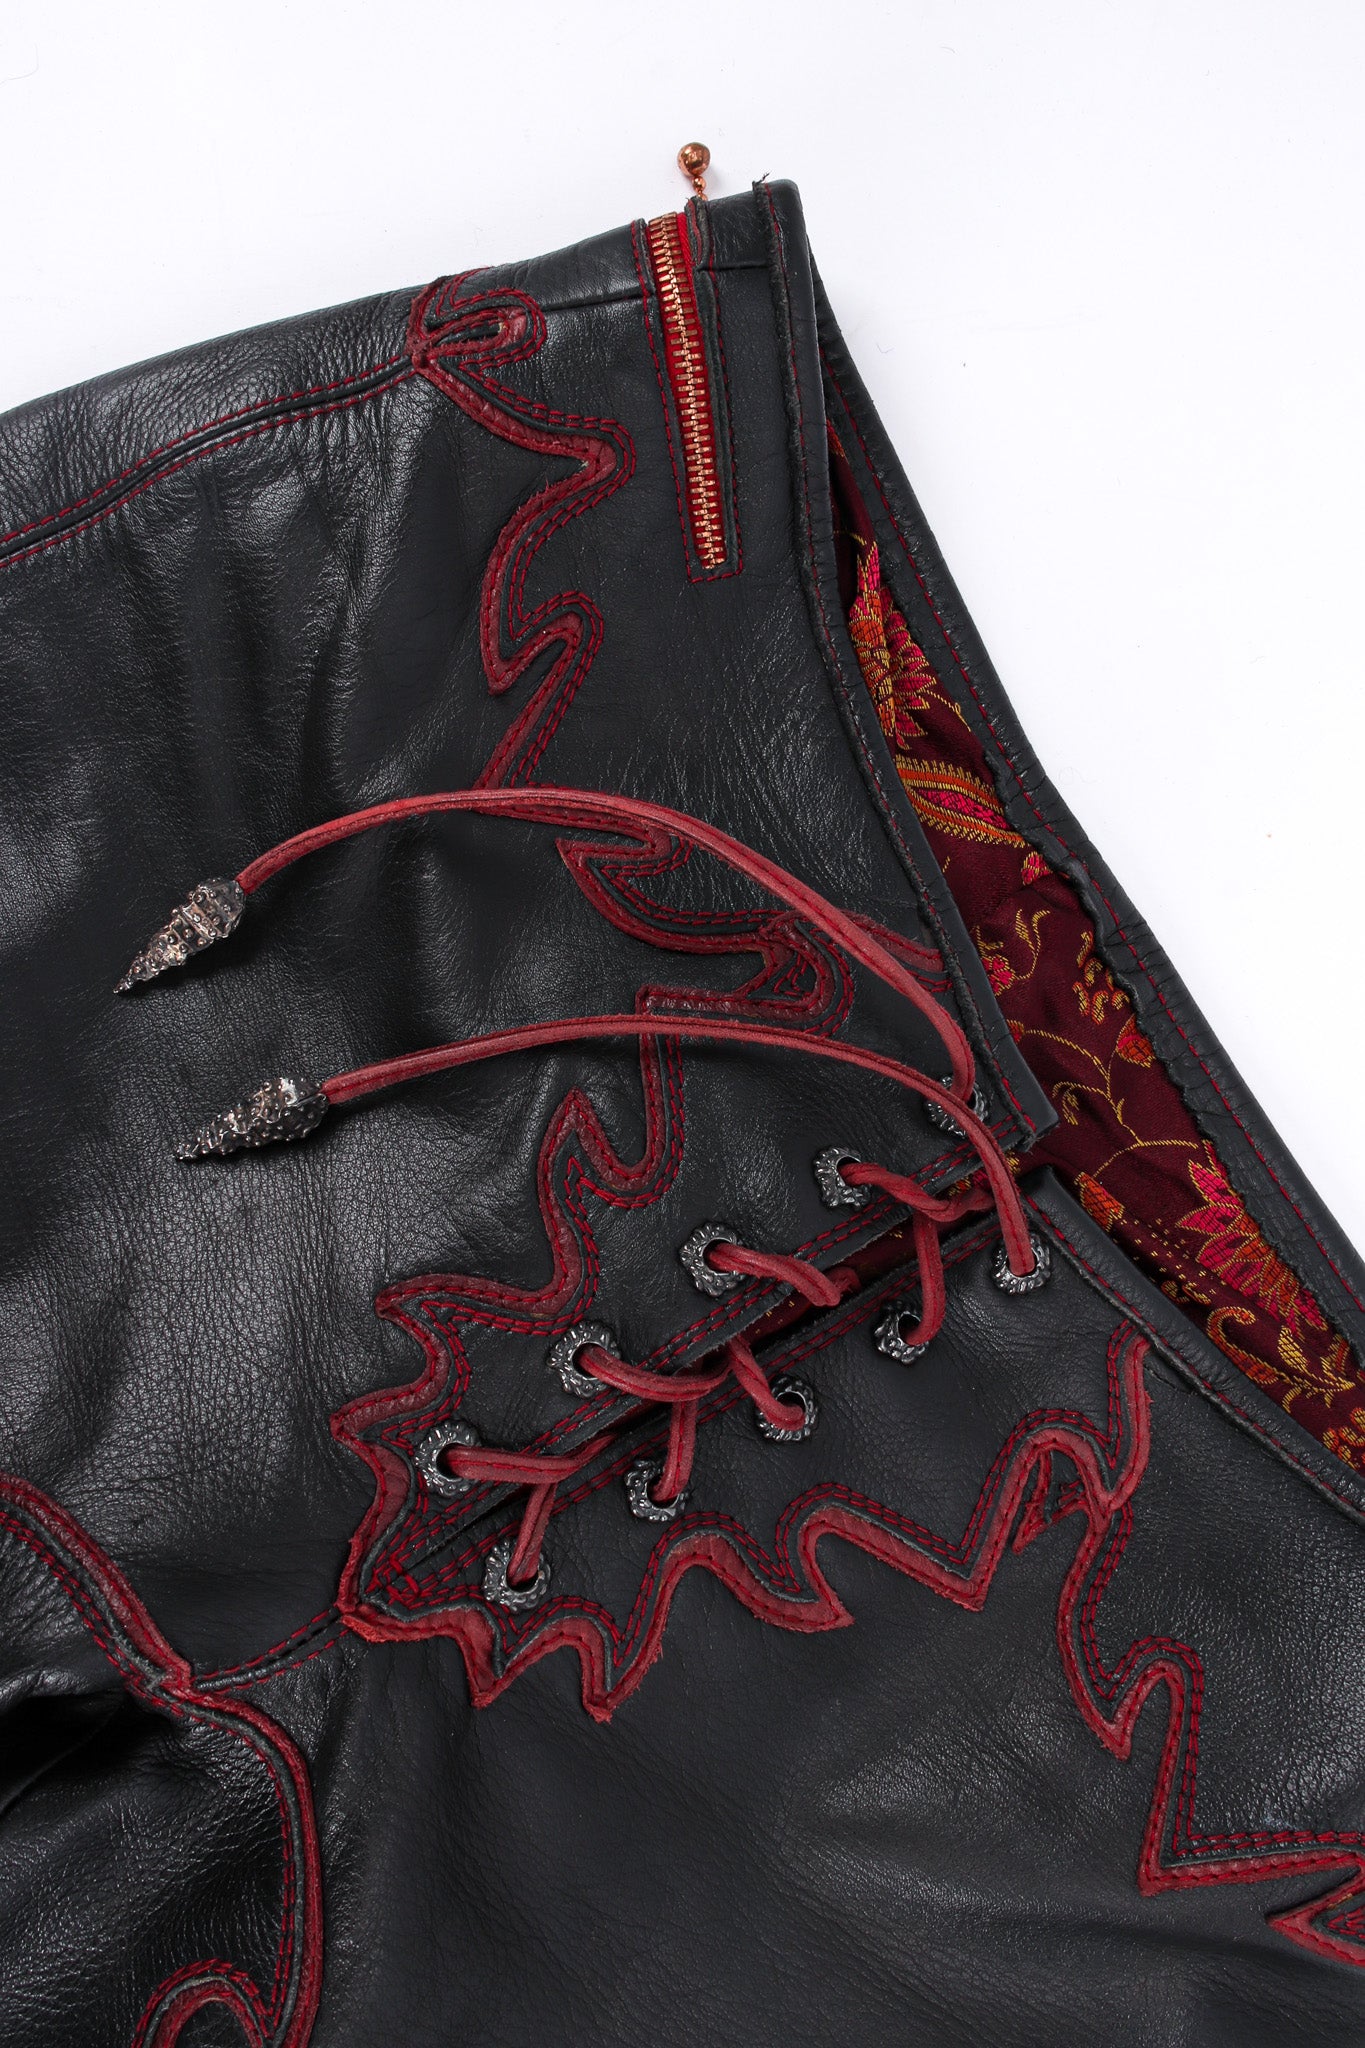 Artisanal Handmade Flame Lace Up Leather Pant lace up/lining close up @ Recess LA